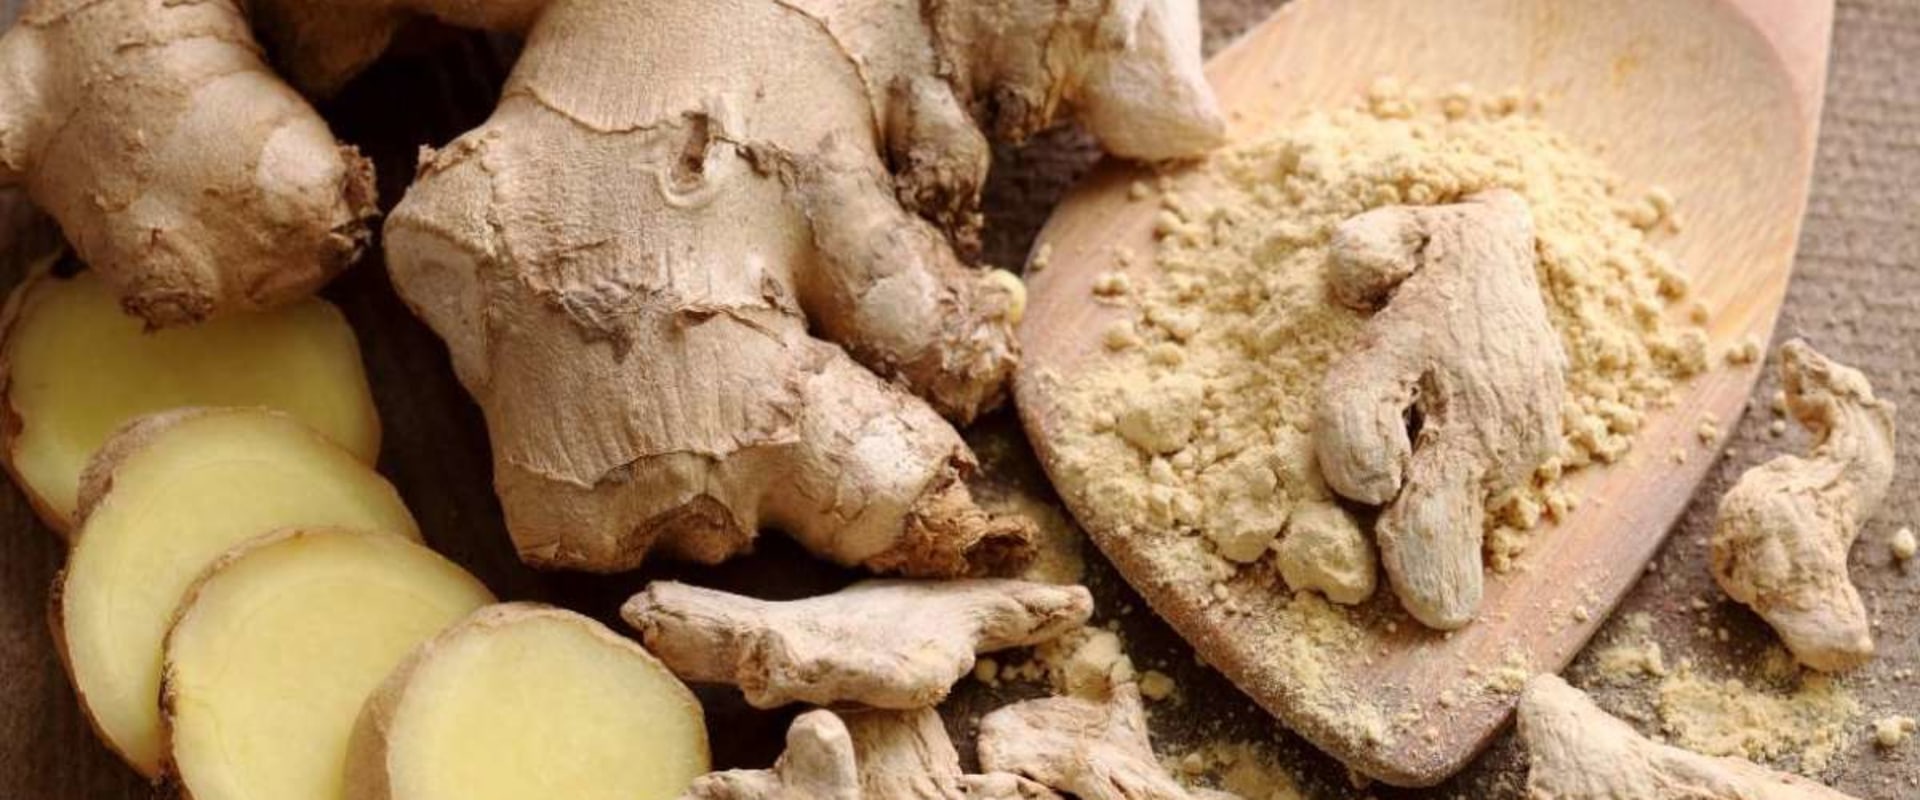 Ginger for Inflammation: How Much Should You Take Daily?